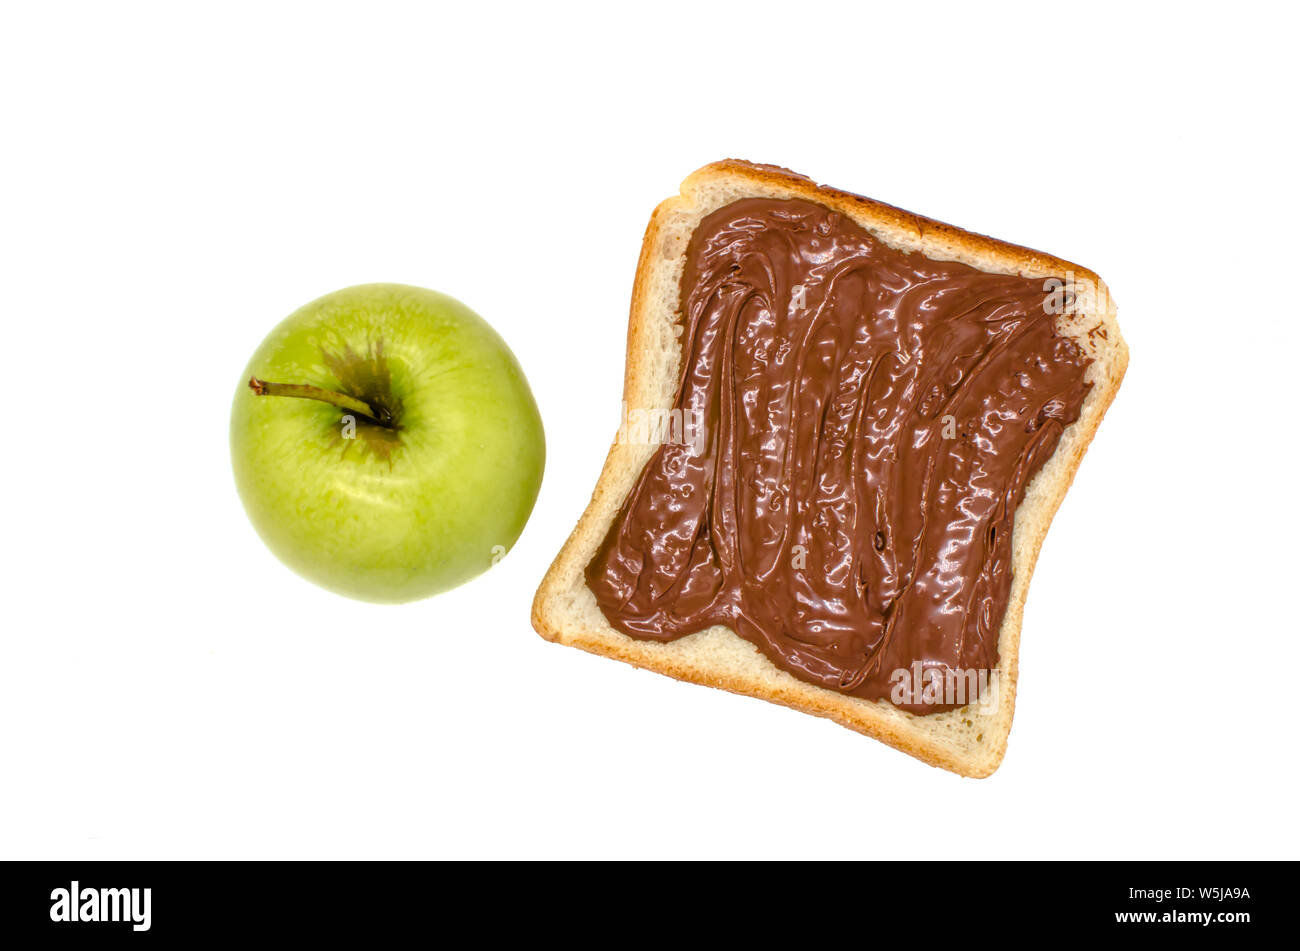 green apple and bread with chocolate nutella paste on a white background isolated Stock Photo